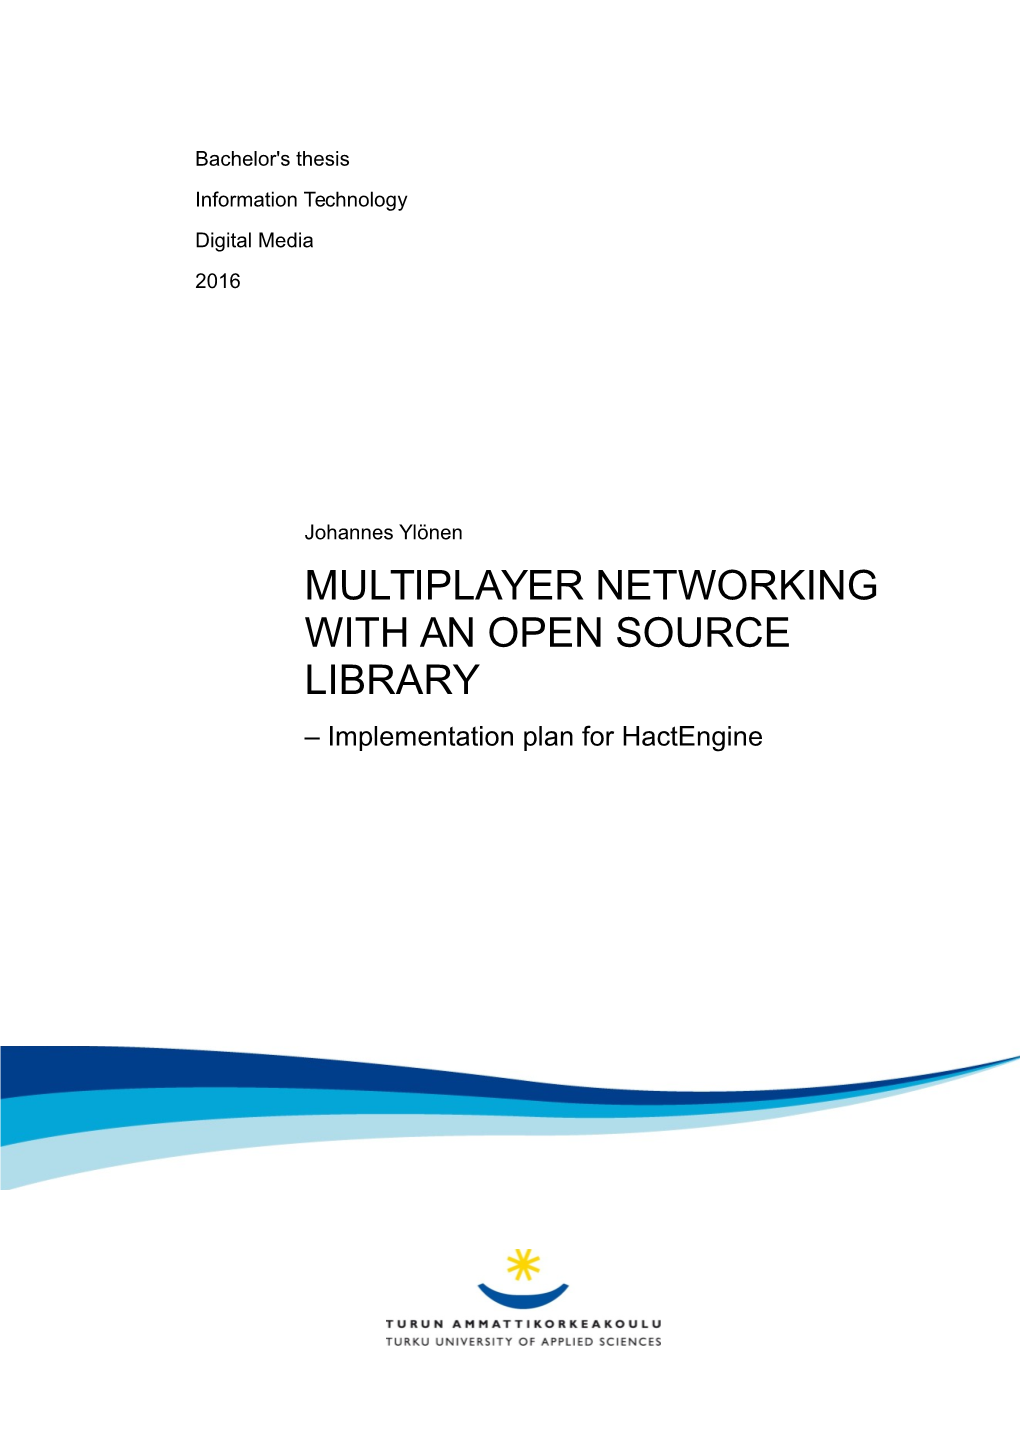 MULTIPLAYER NETWORKING with an OPEN SOURCE LIBRARY – Implementation Plan for Hactengine BACHELOR's THESIS | ABSTRACT